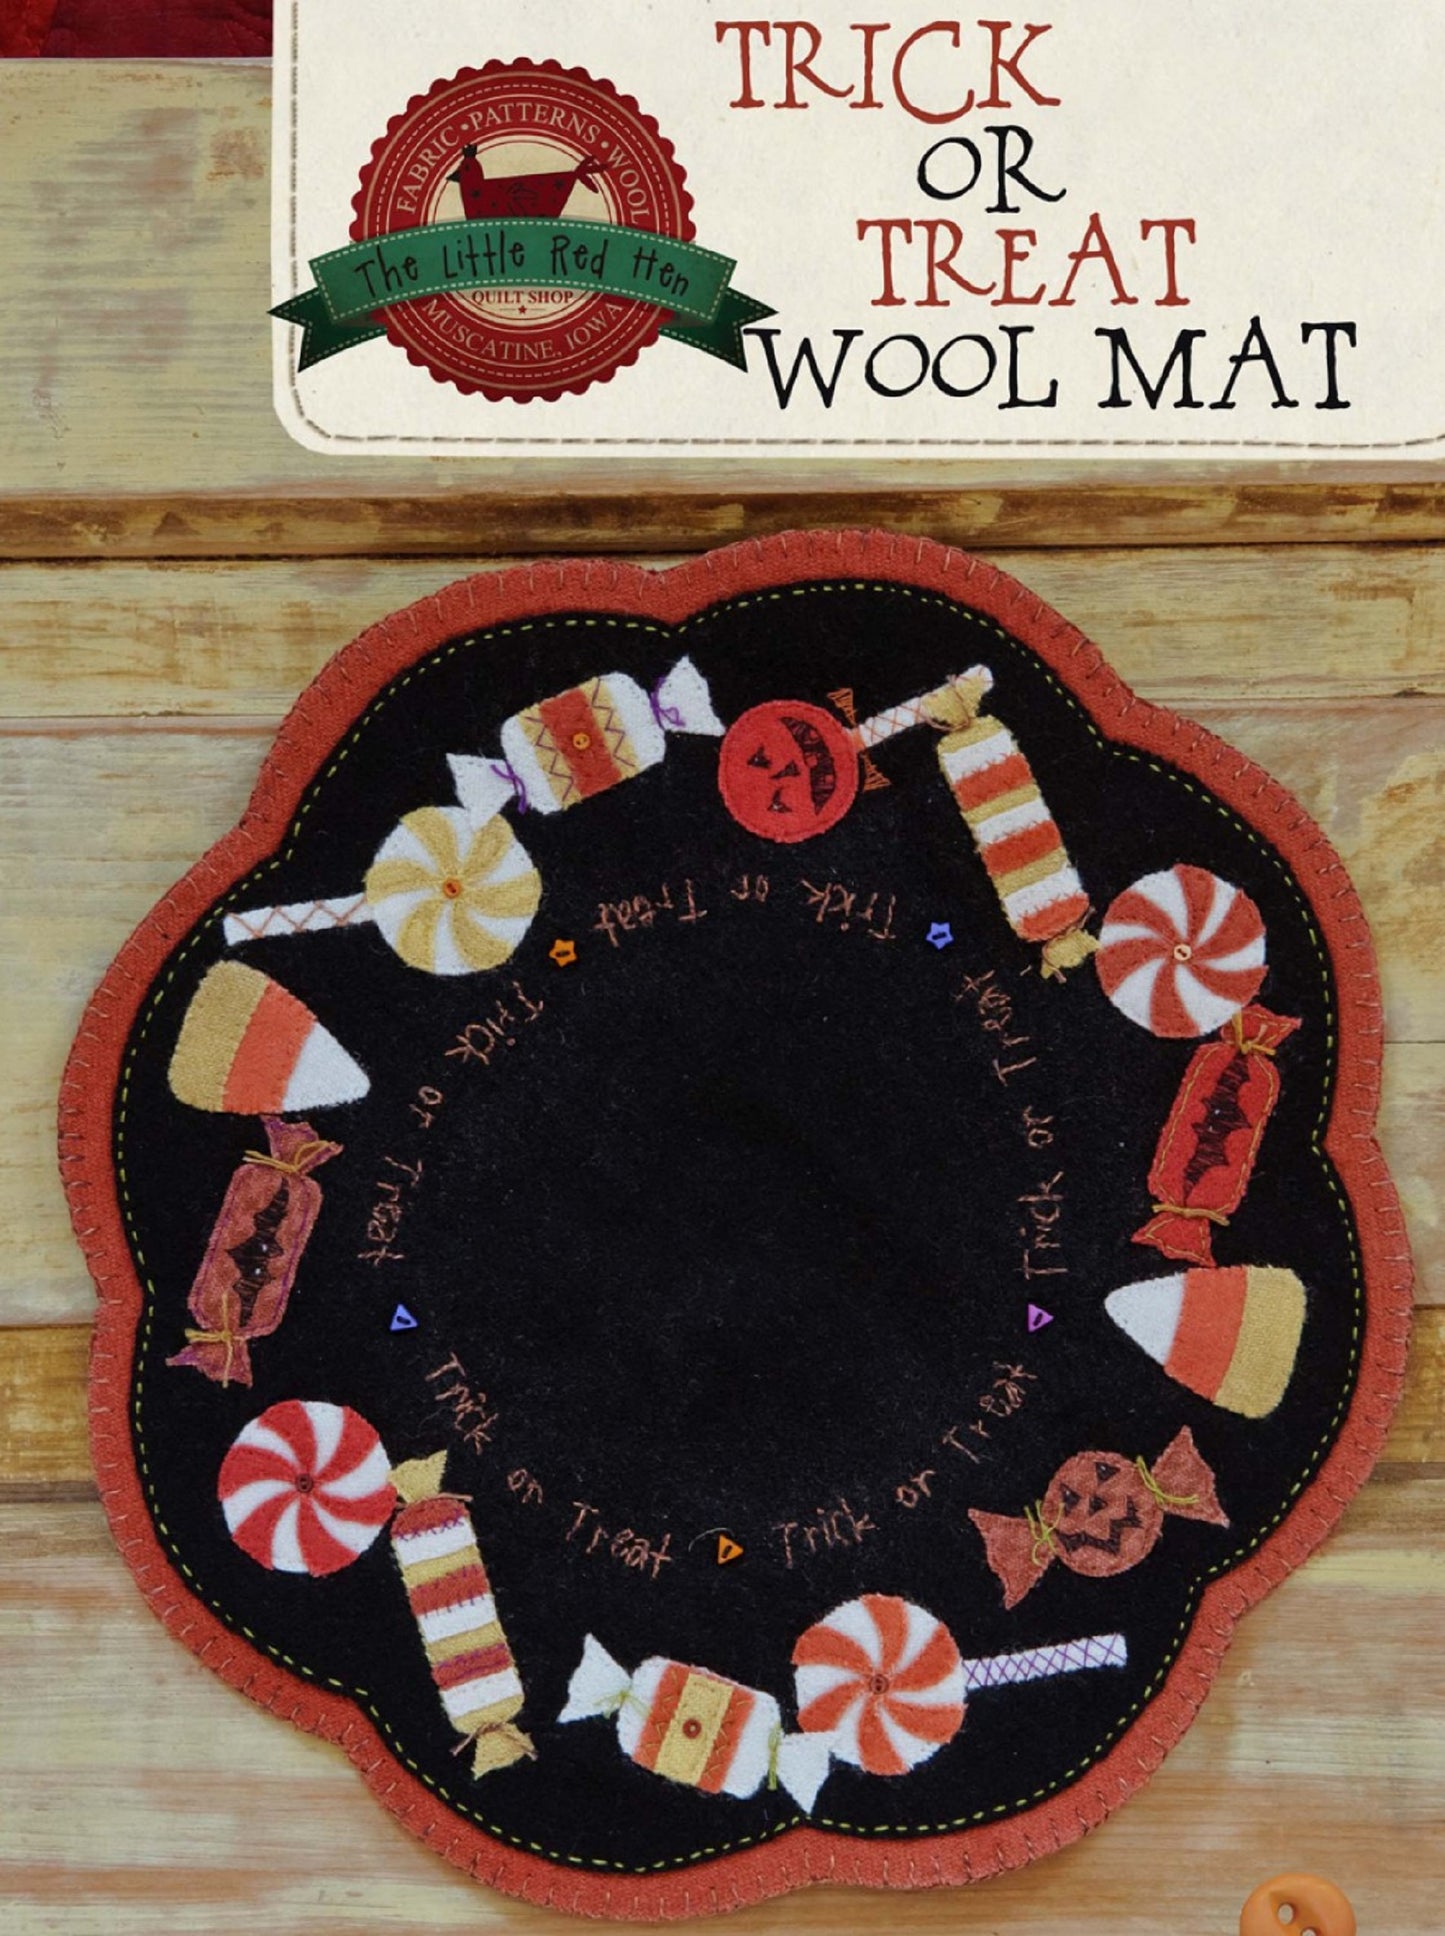 Trick or Treat Wool Mat Pattern by The Little Red Hen